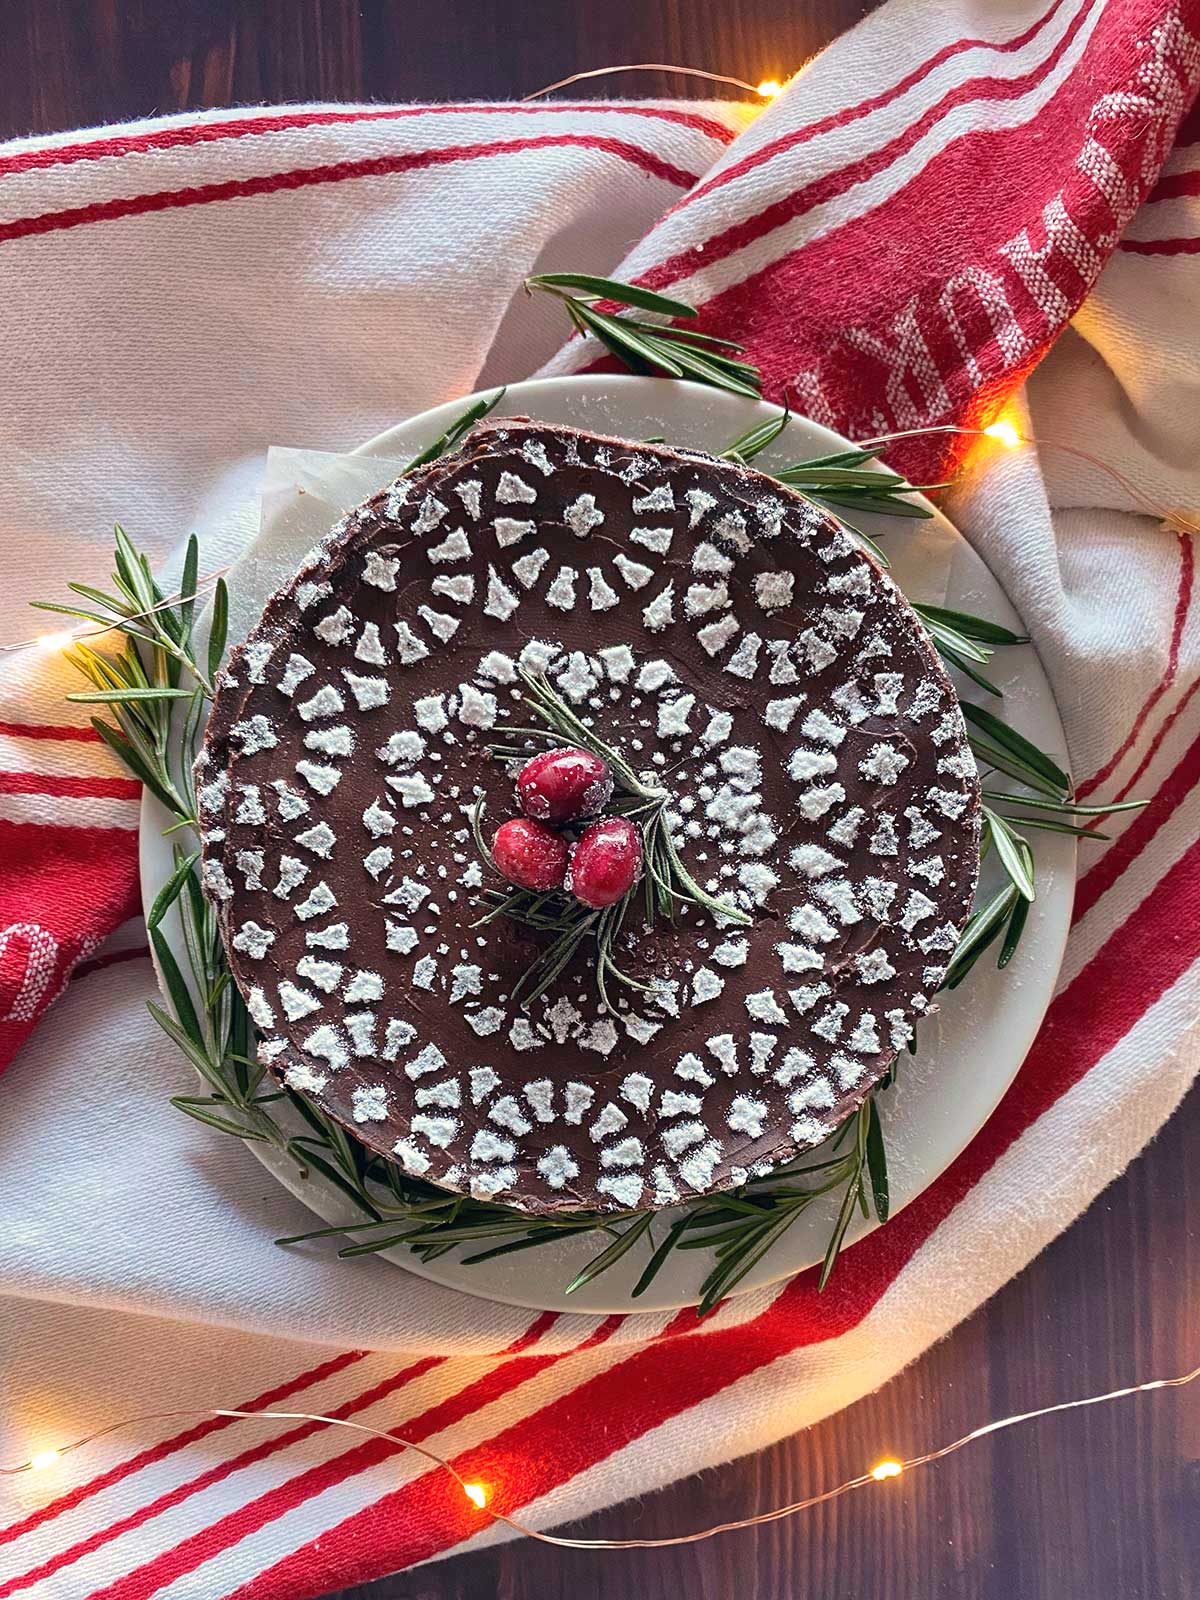 A flourless chocolate cake dressed up with a stenciled design on top and sugared cranberries for garnish